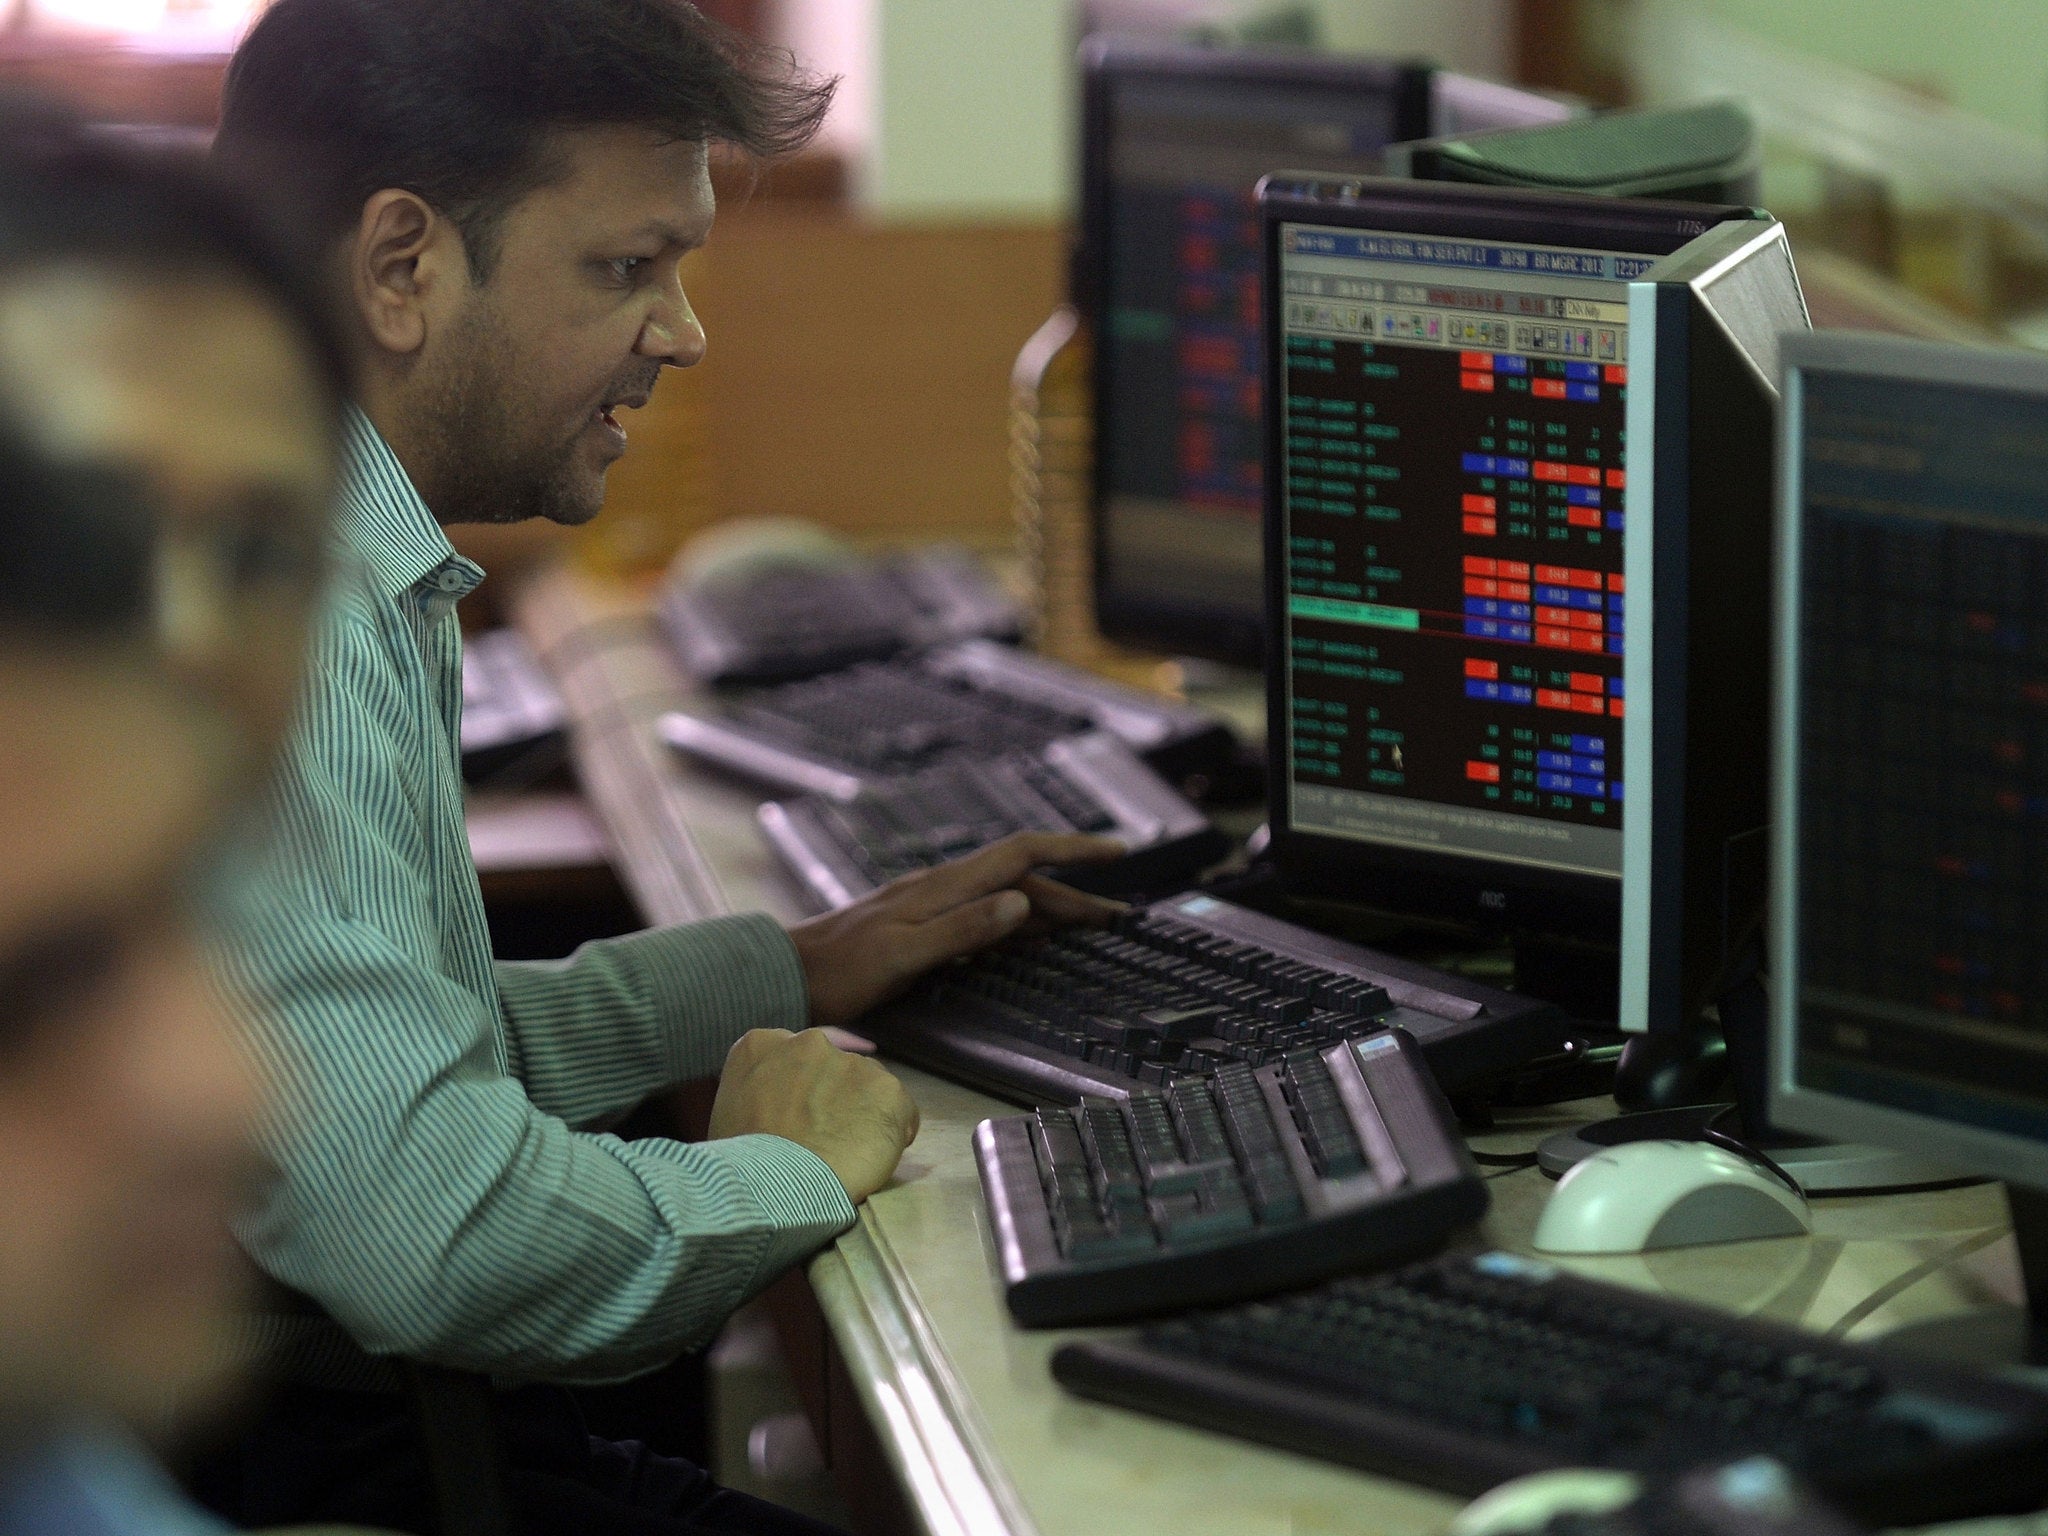 An Indian broker works at a computer terminal at a trading firm in Mumbai on December 9, 2013